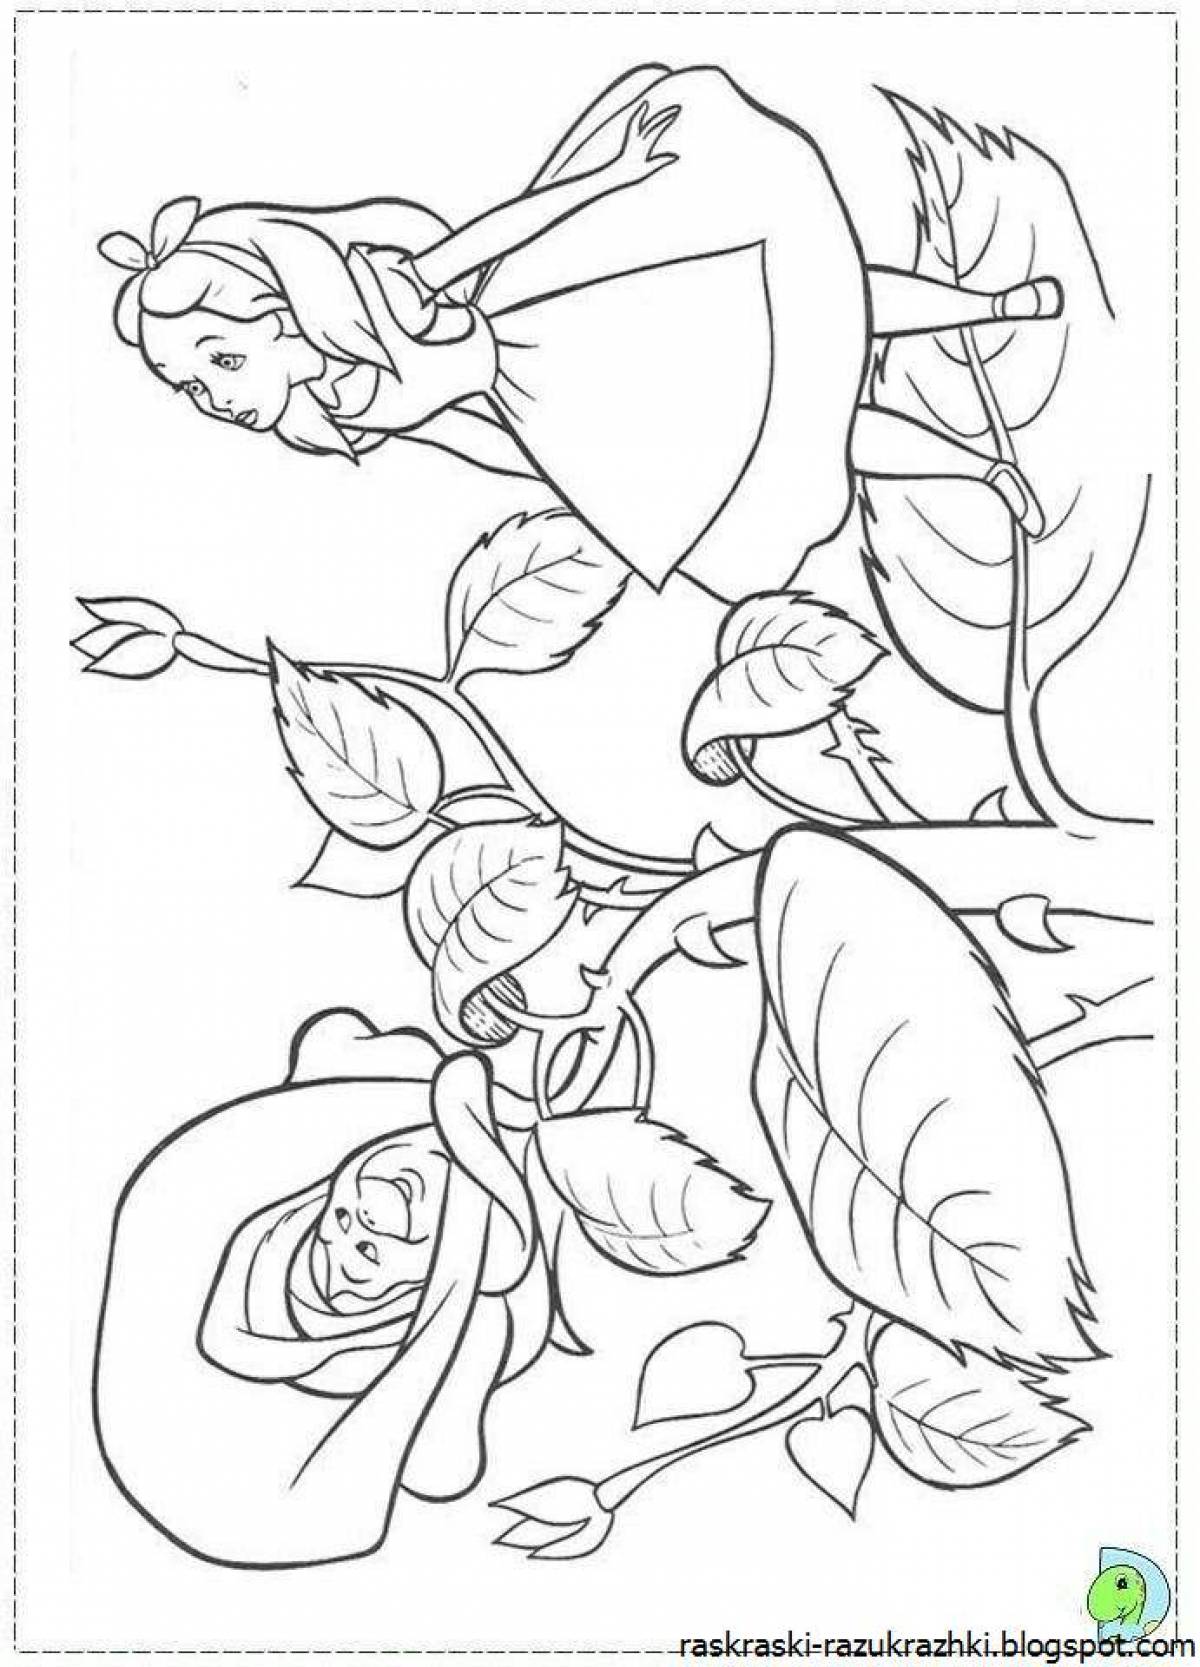 Colorful alice find coloring page